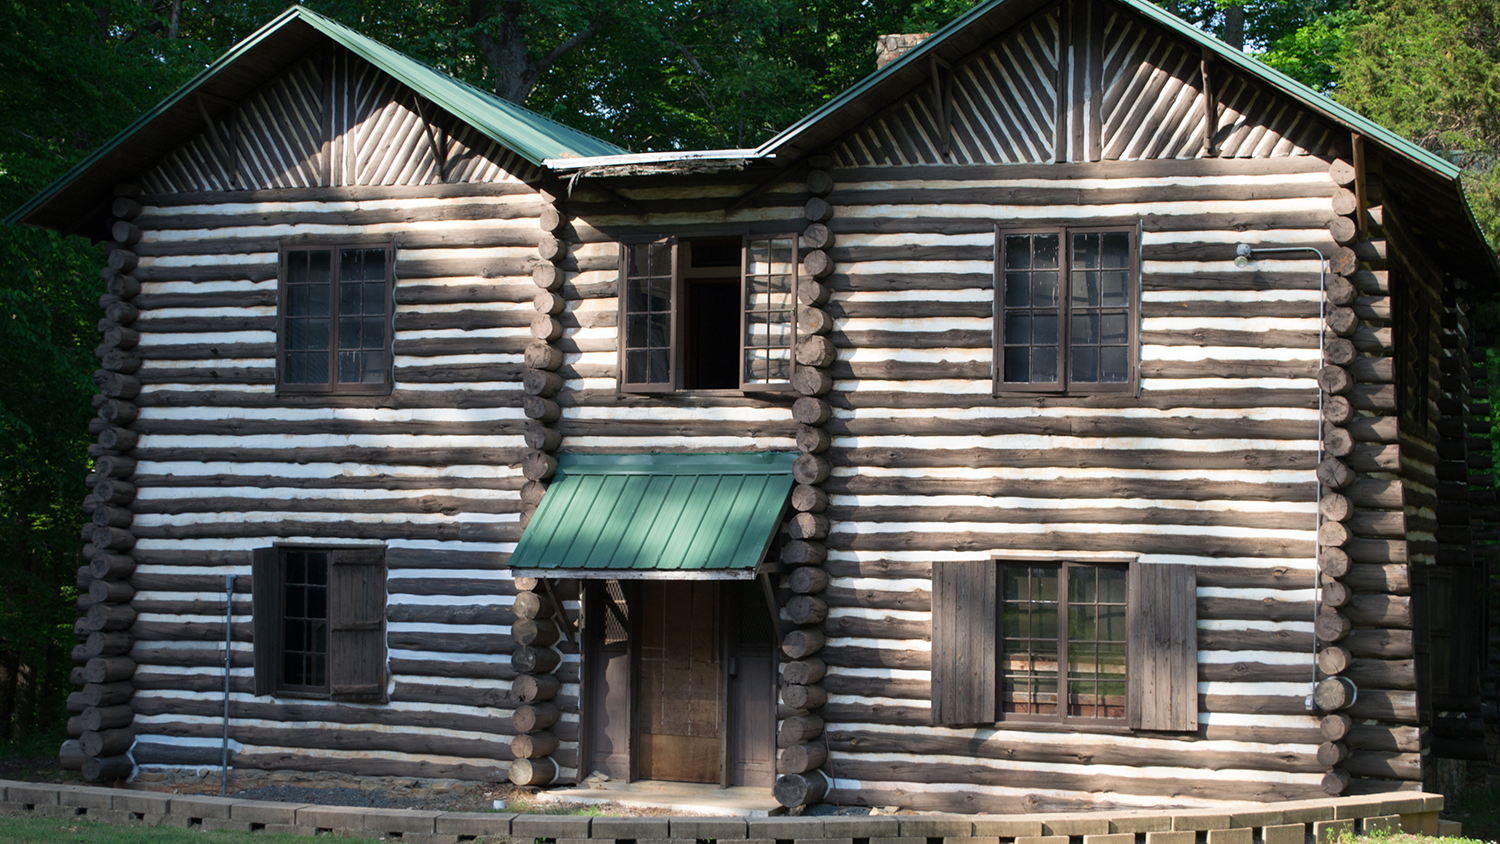 Wide-angle photo showing the exterior of the historic lodge at Slocum Camp in Rougemont, North Carolina - New Campaign Hopes to Bring New Life to Forestry Summer Camp - College of Natural Resources News NC State University